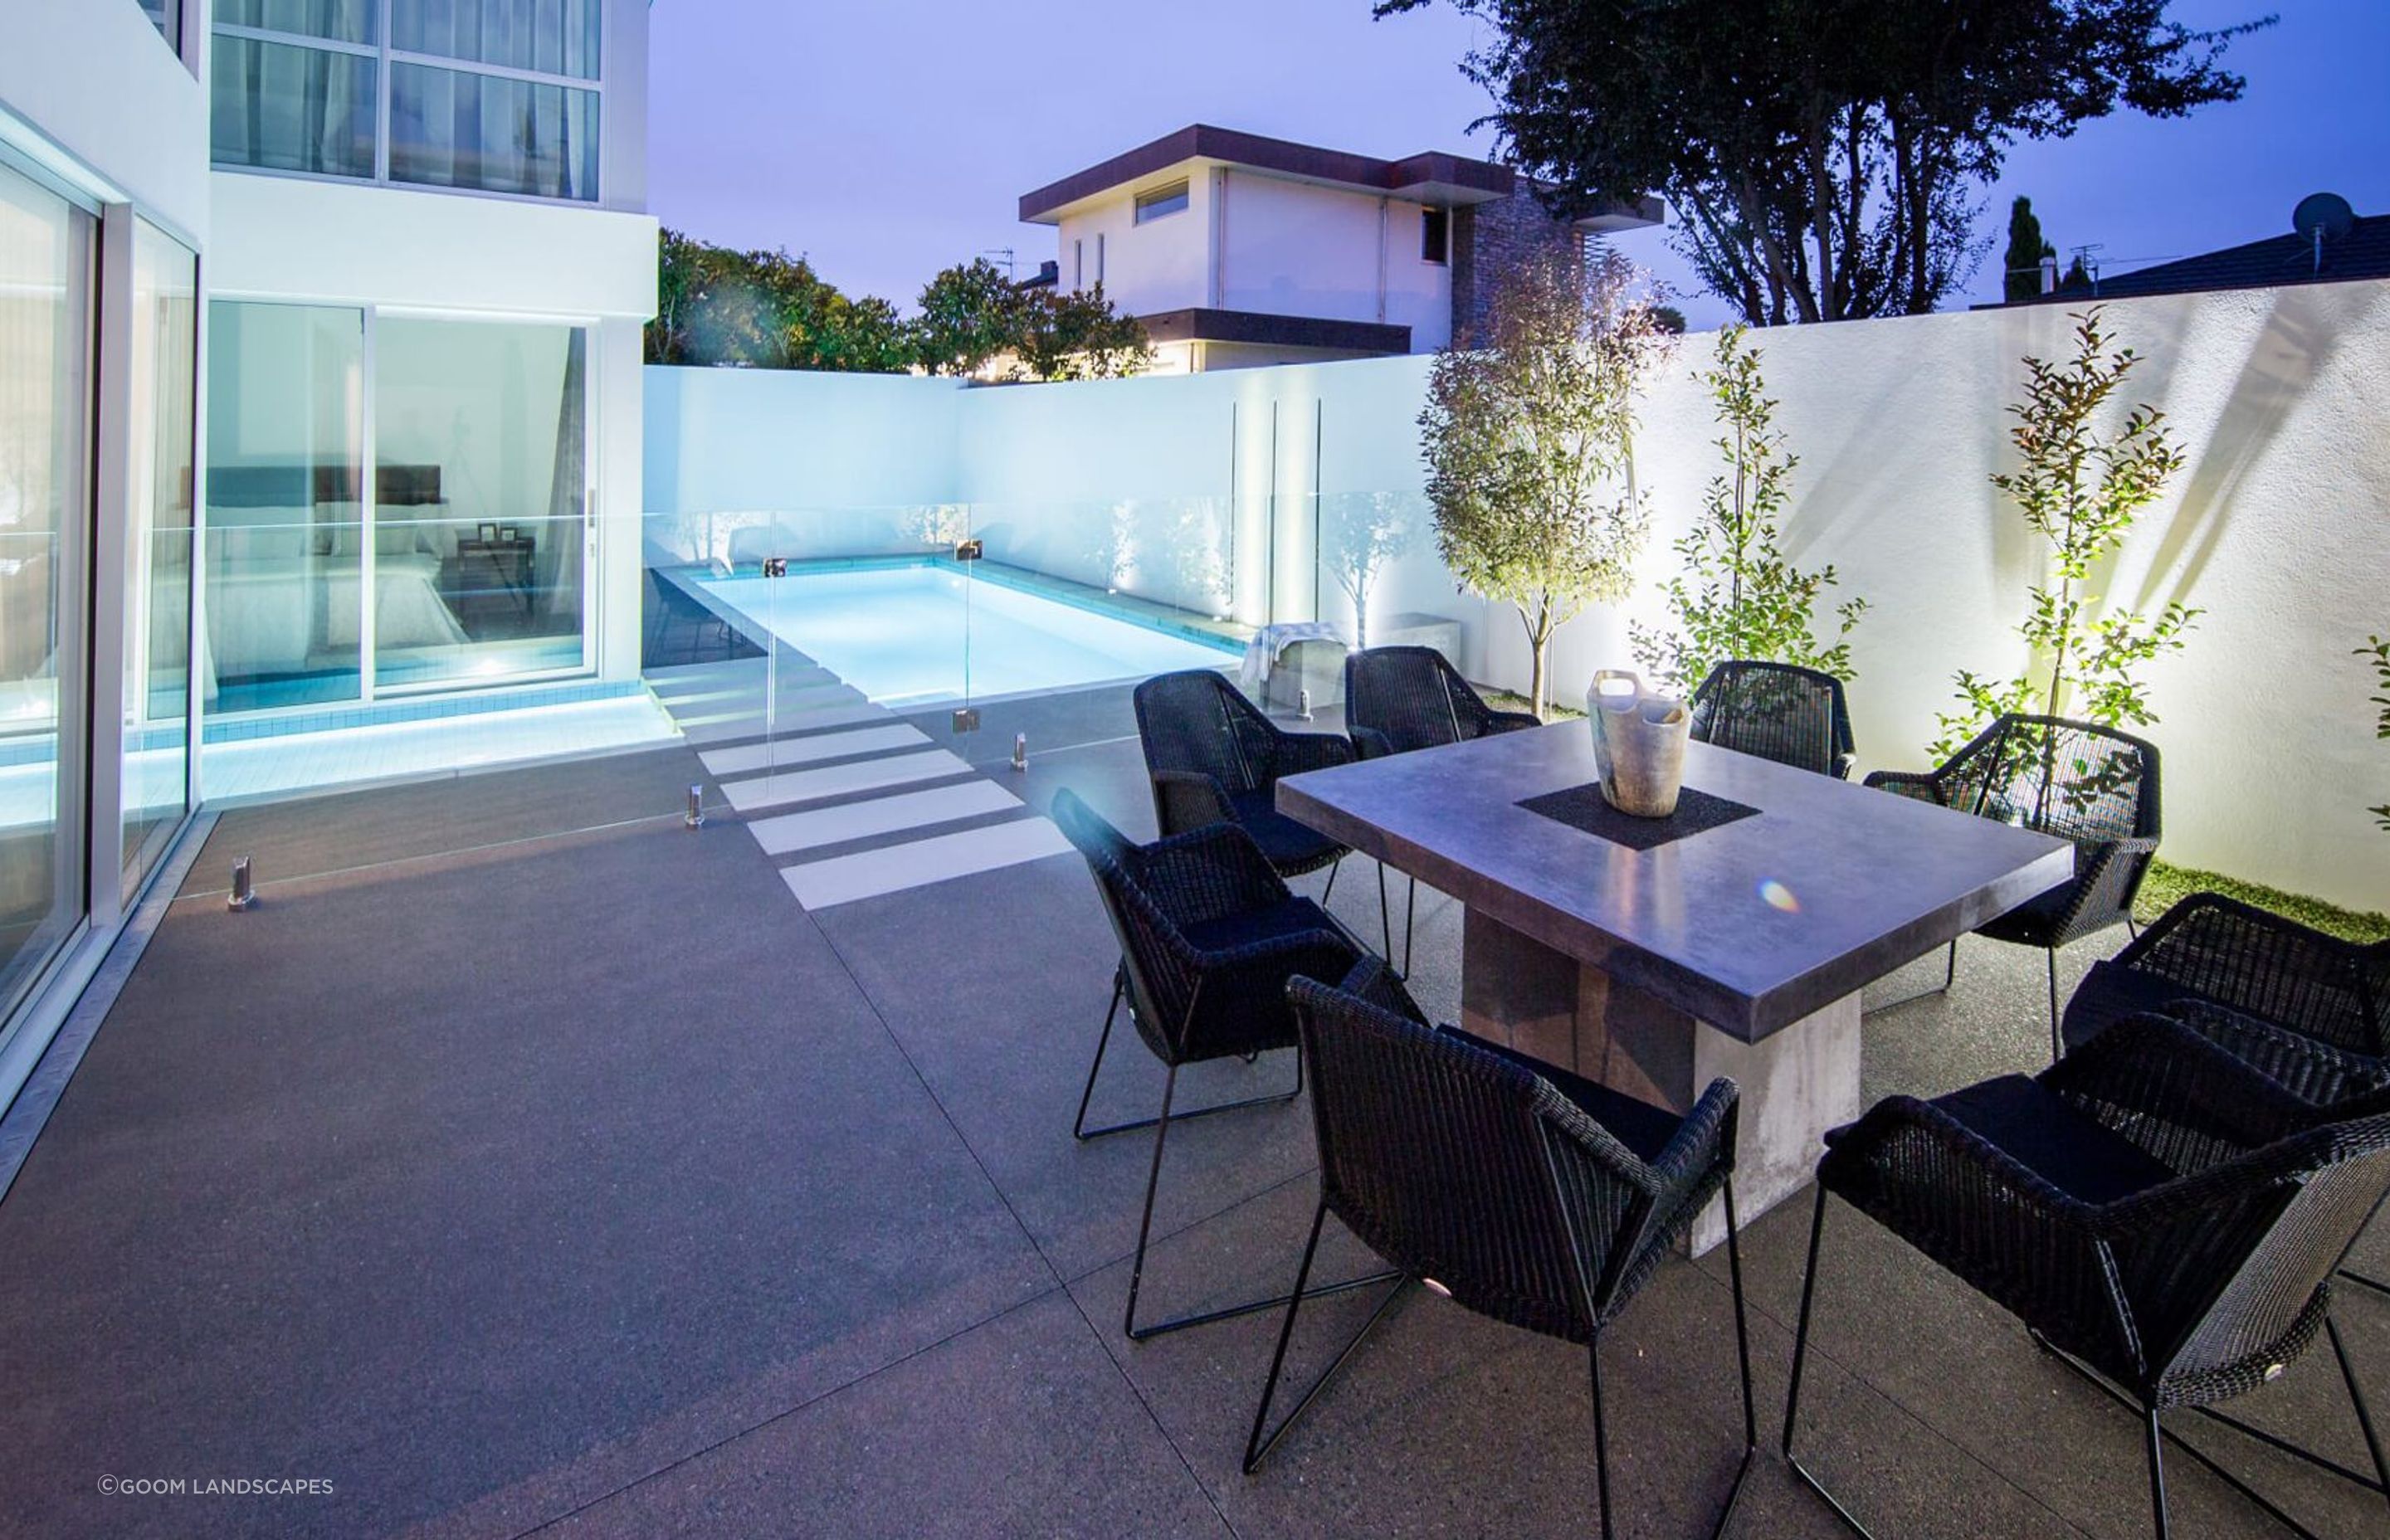 A Merivale home with a stylish pool that laps up against the side of the house.